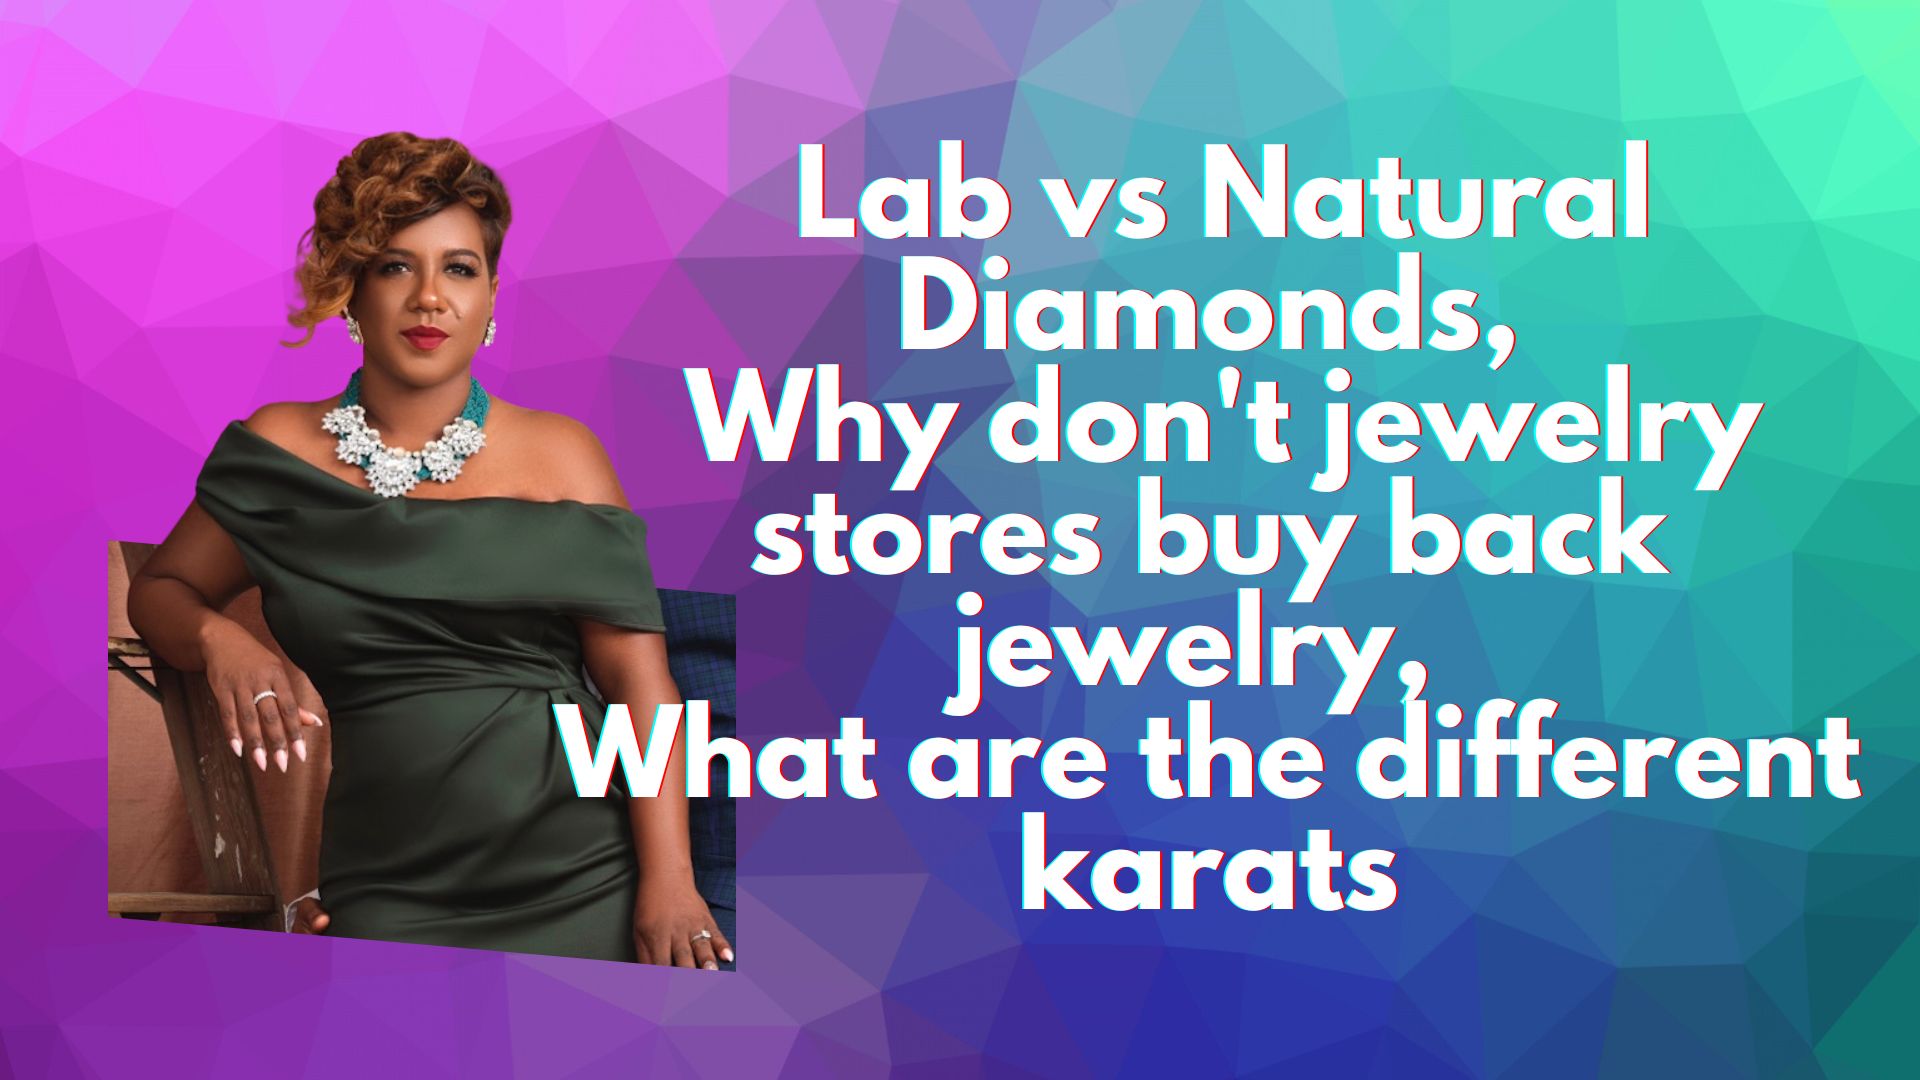 Lab vs Natural Diamonds with The First Lady